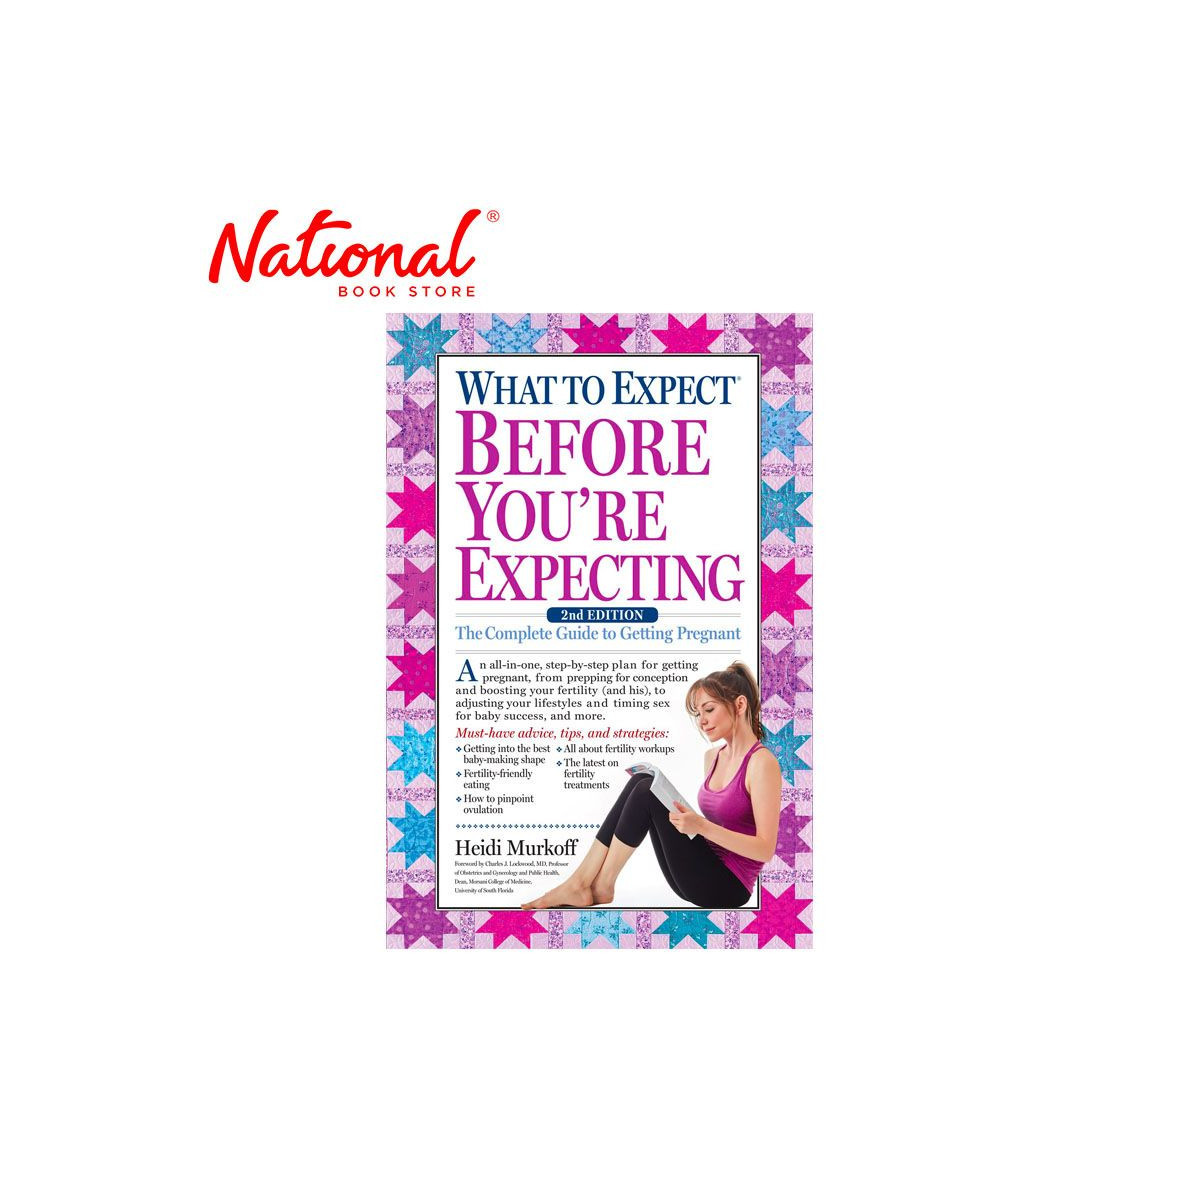 What to Expect Before You're Expecting Trade Paperback by Heidi Murkoff - Pregnancy - Parenting